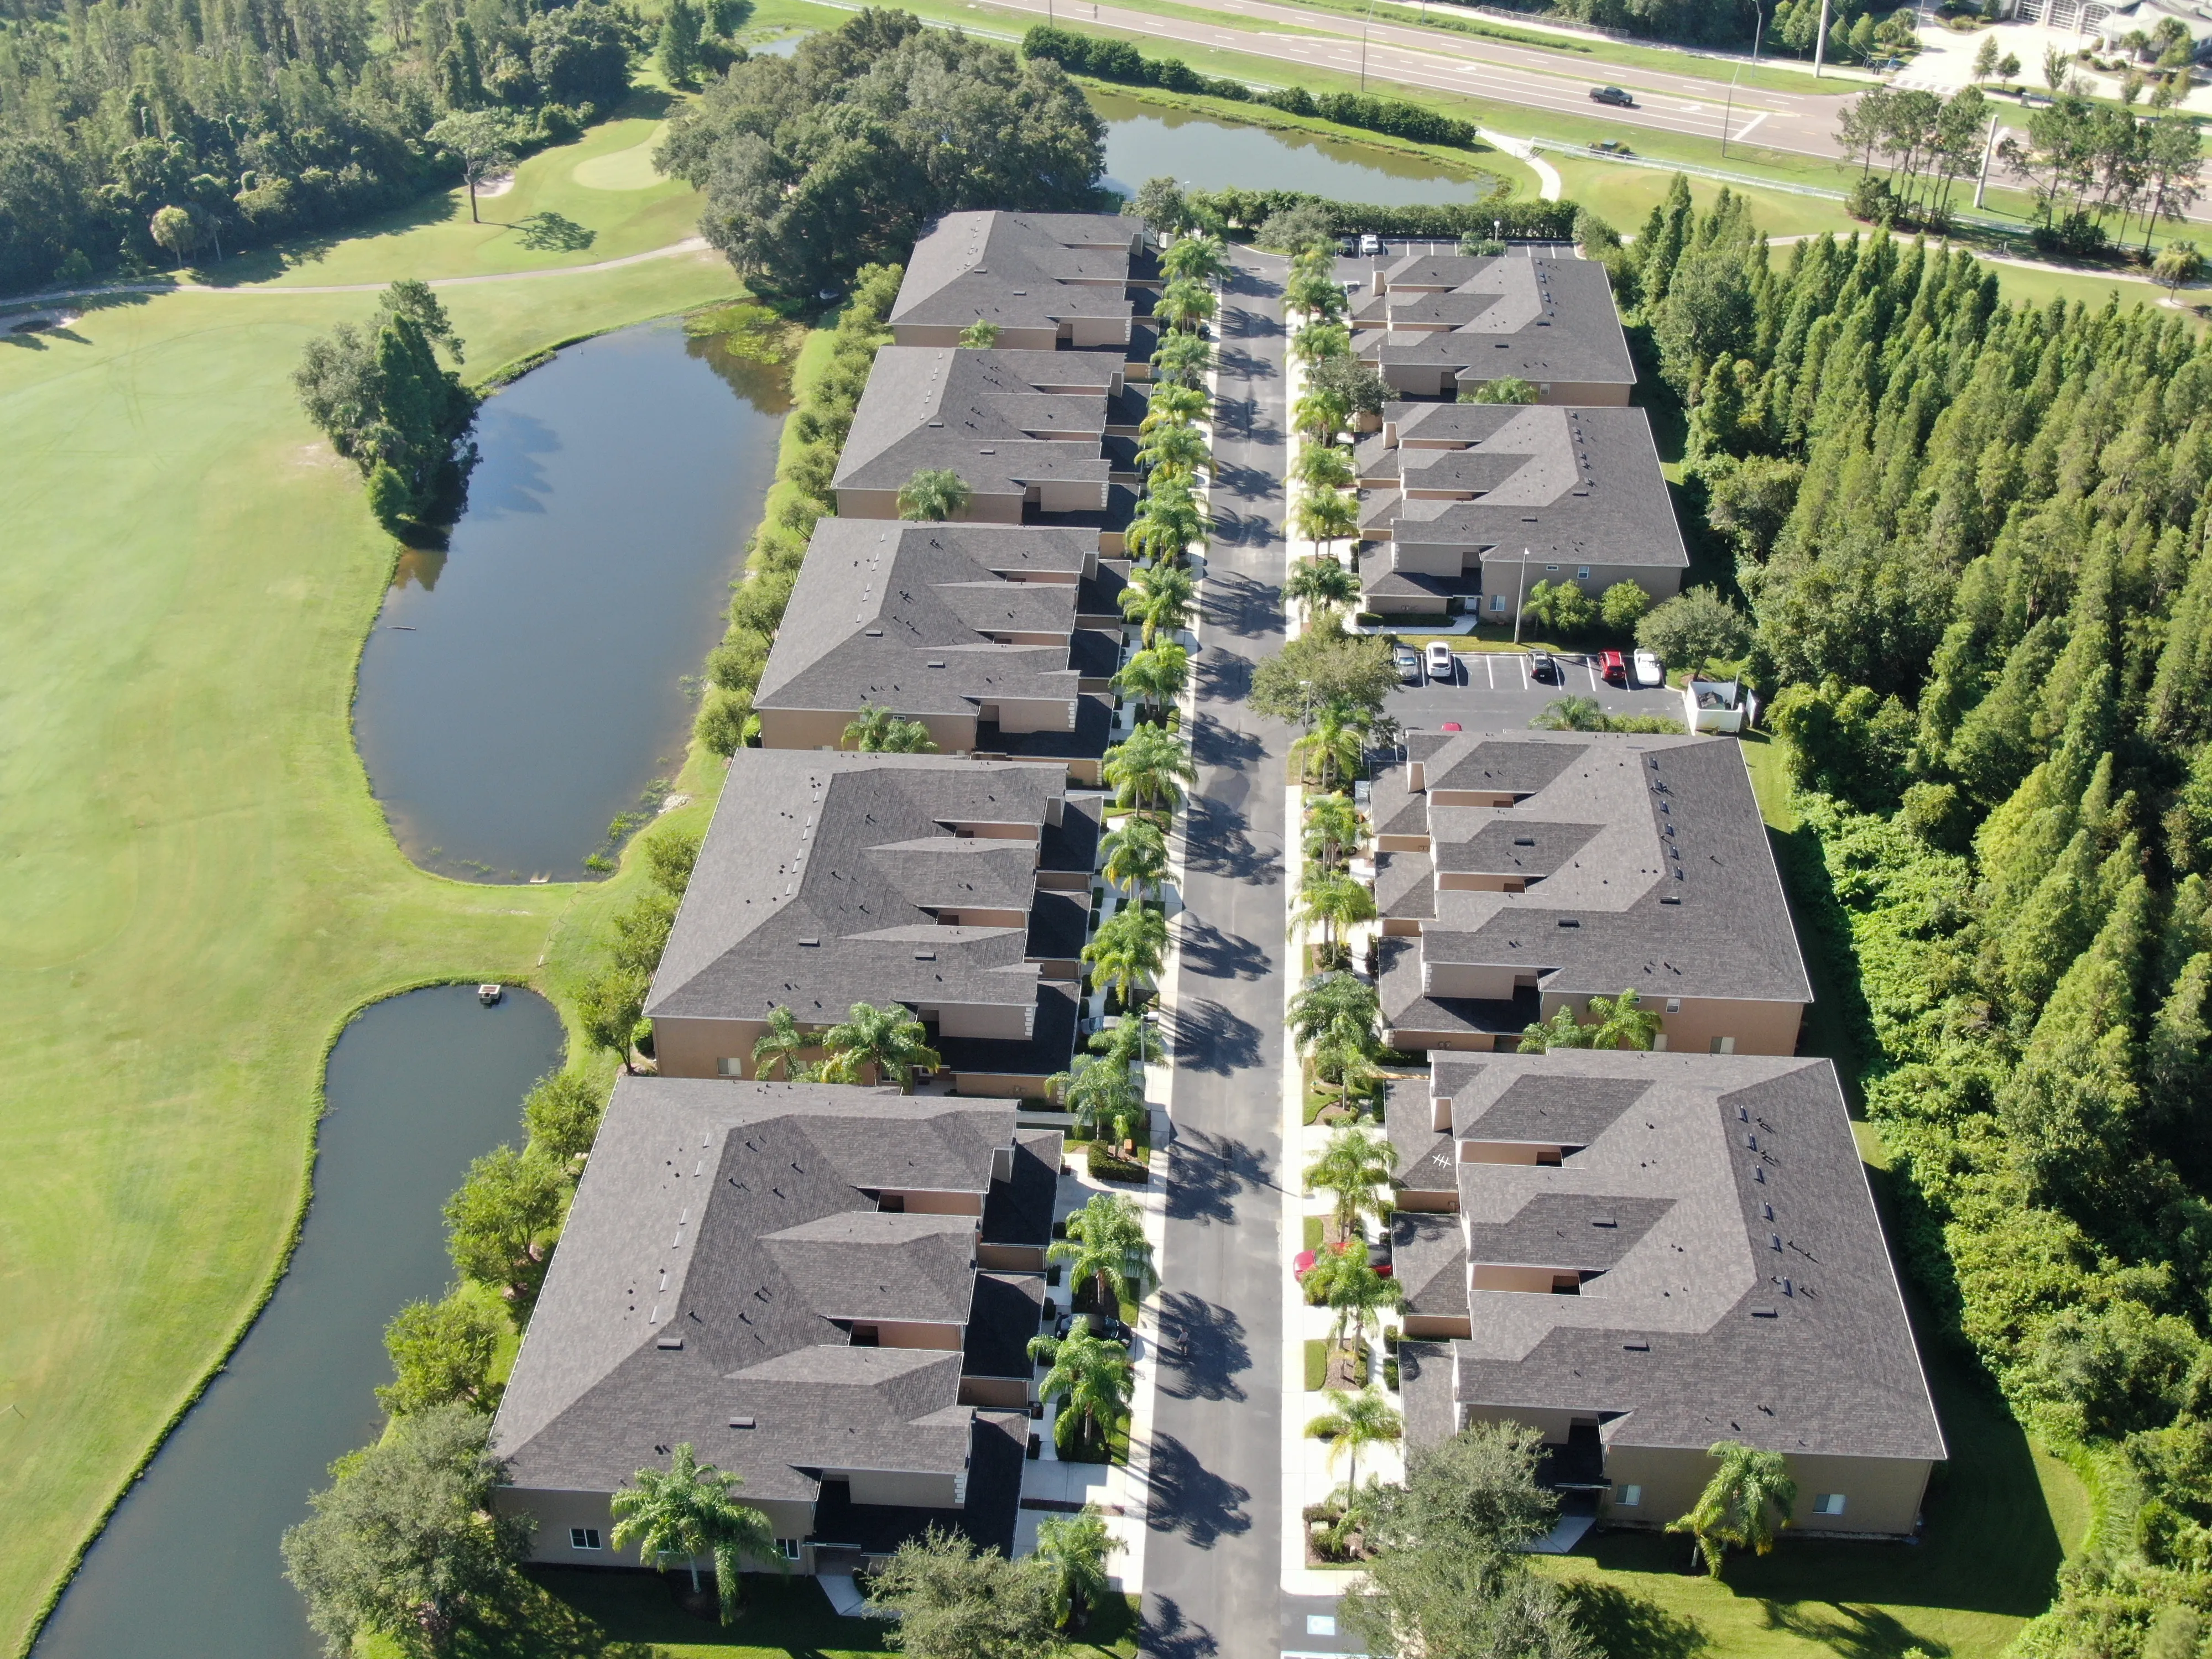 New shingle roofs on a condominium community in Florida